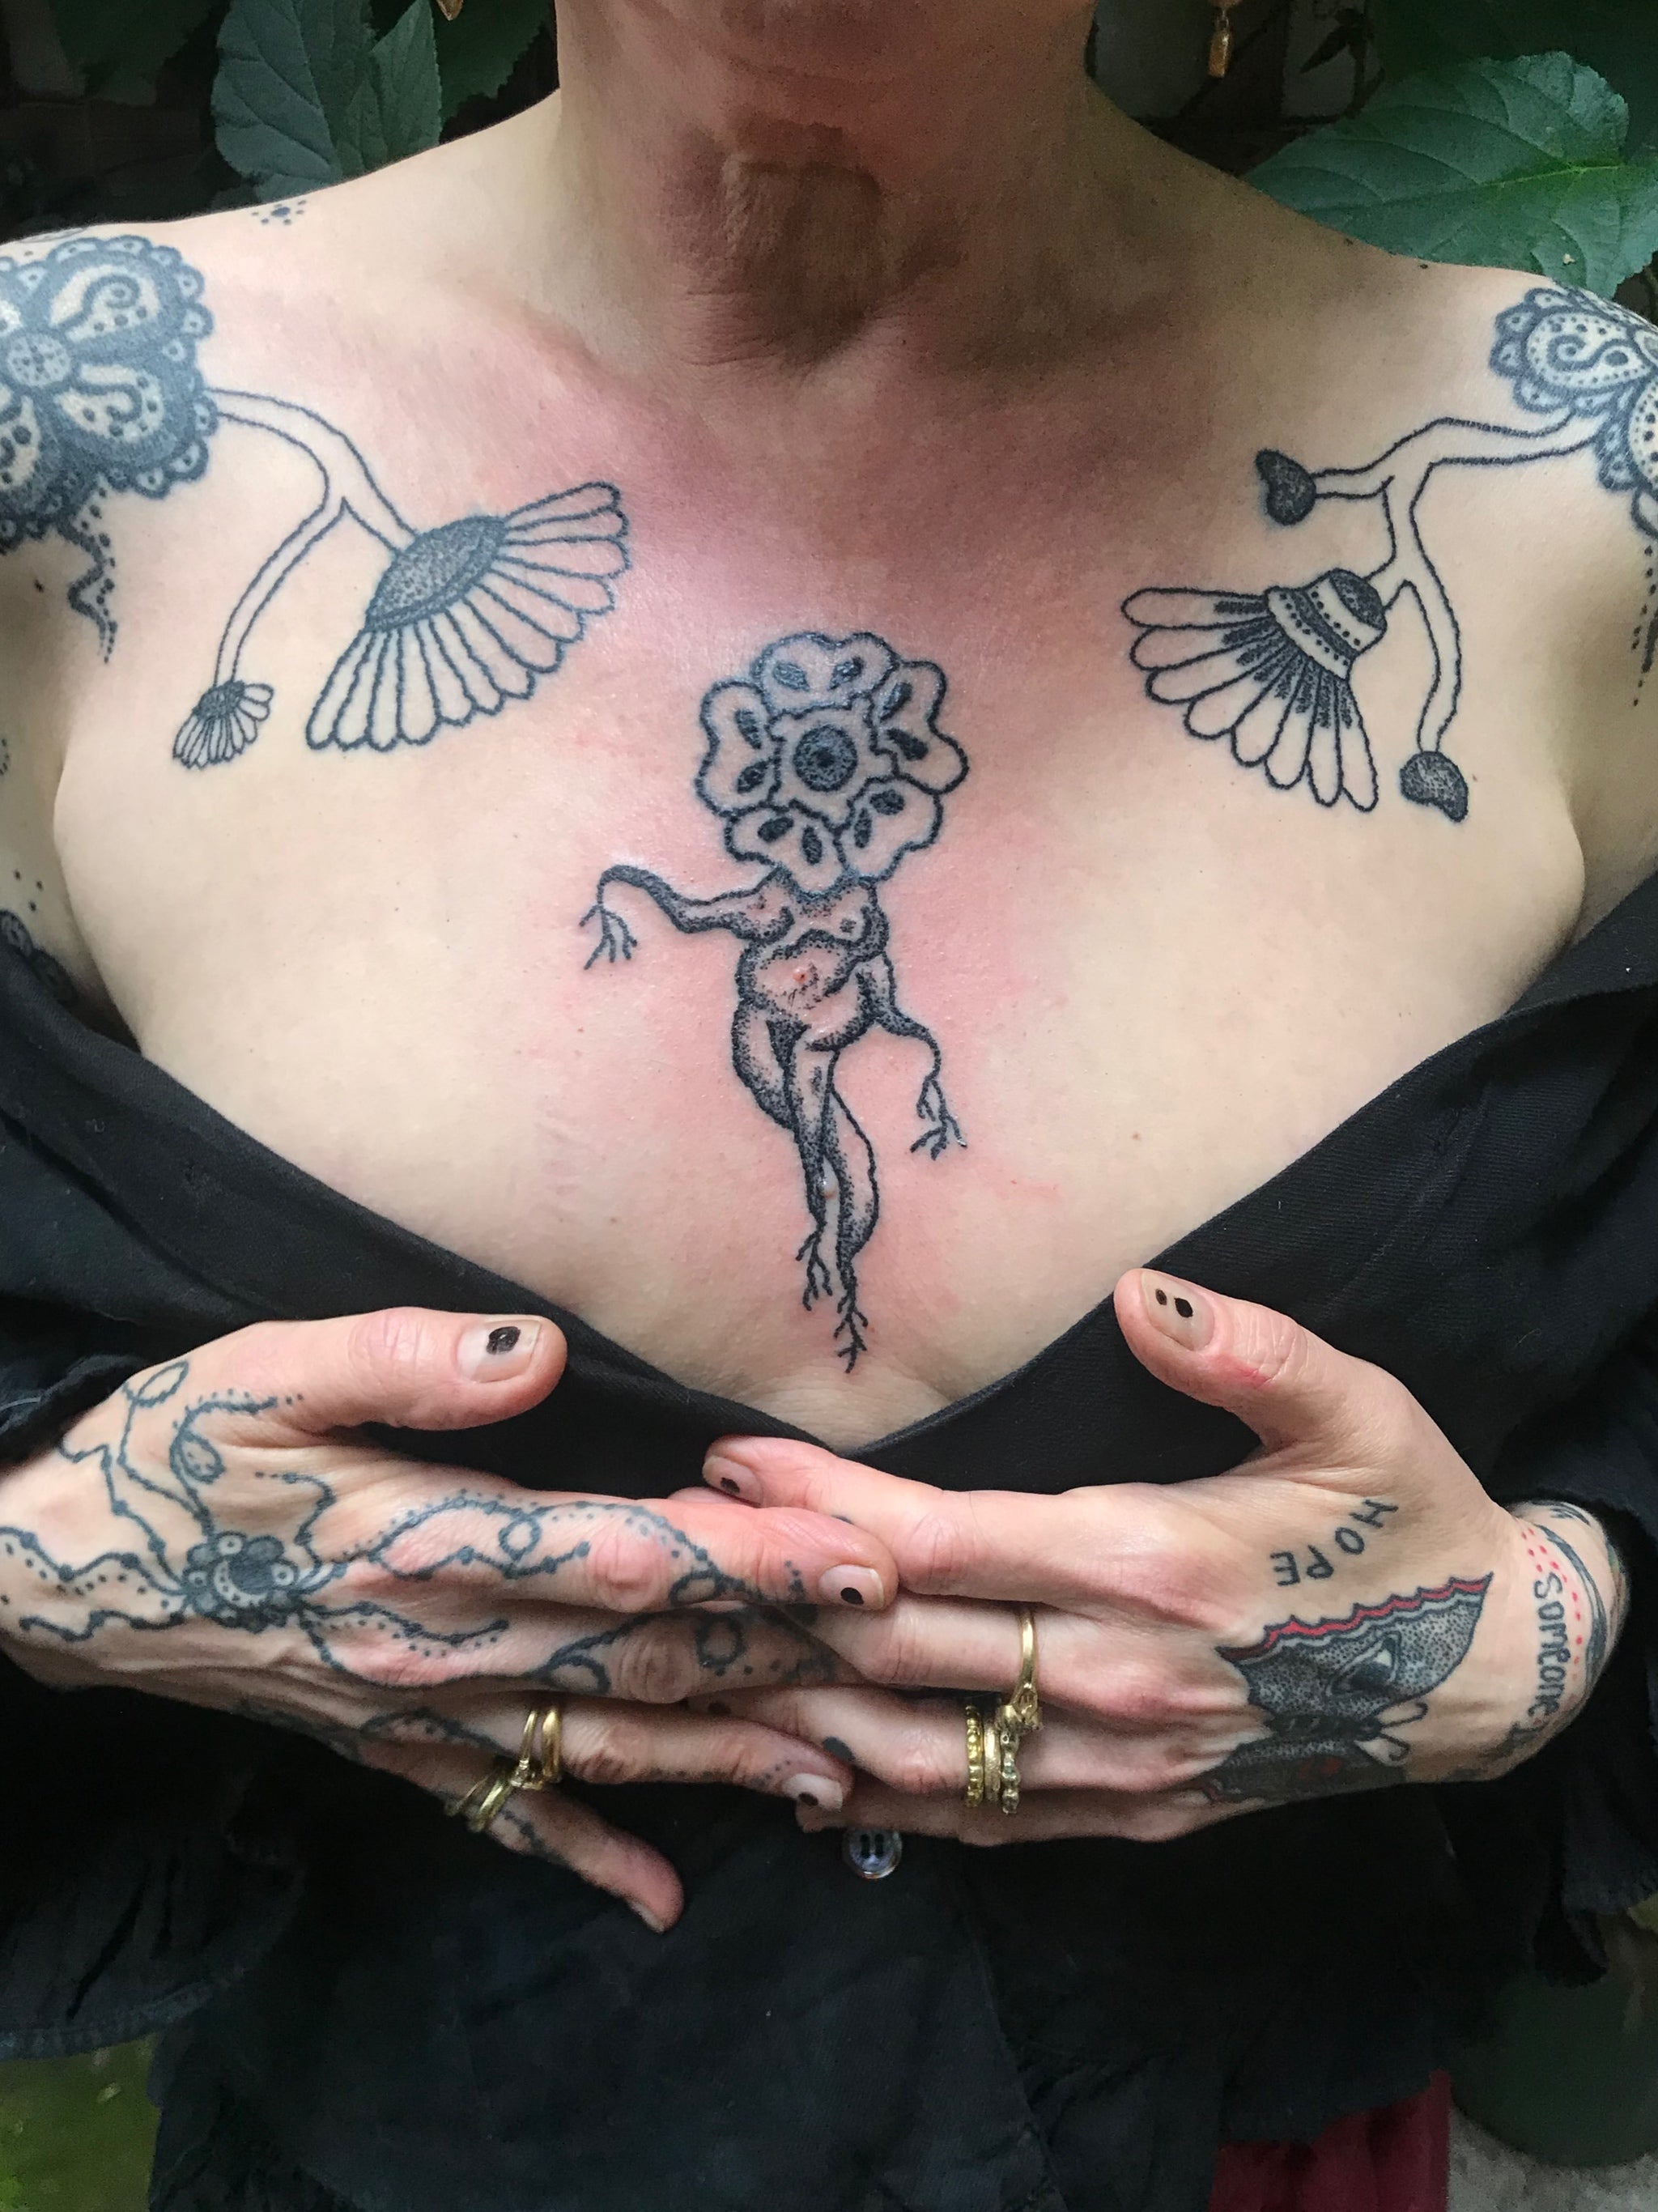 Woman with her hands at her bust showing off her black tattoos on her chest